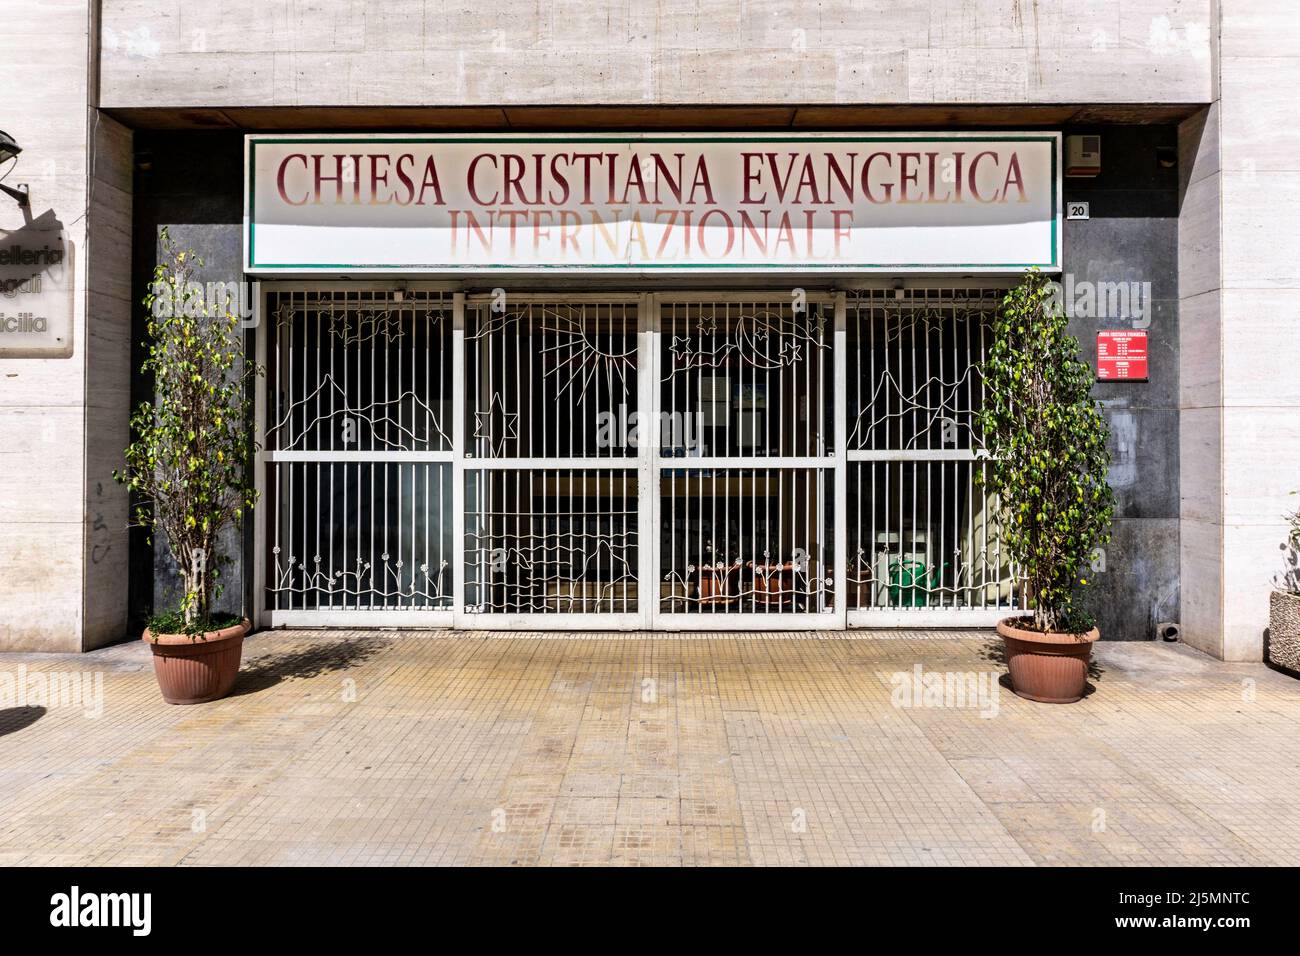 An International Evangelical Christian Church in Palermo, Sicily, Italy. Stock Photo